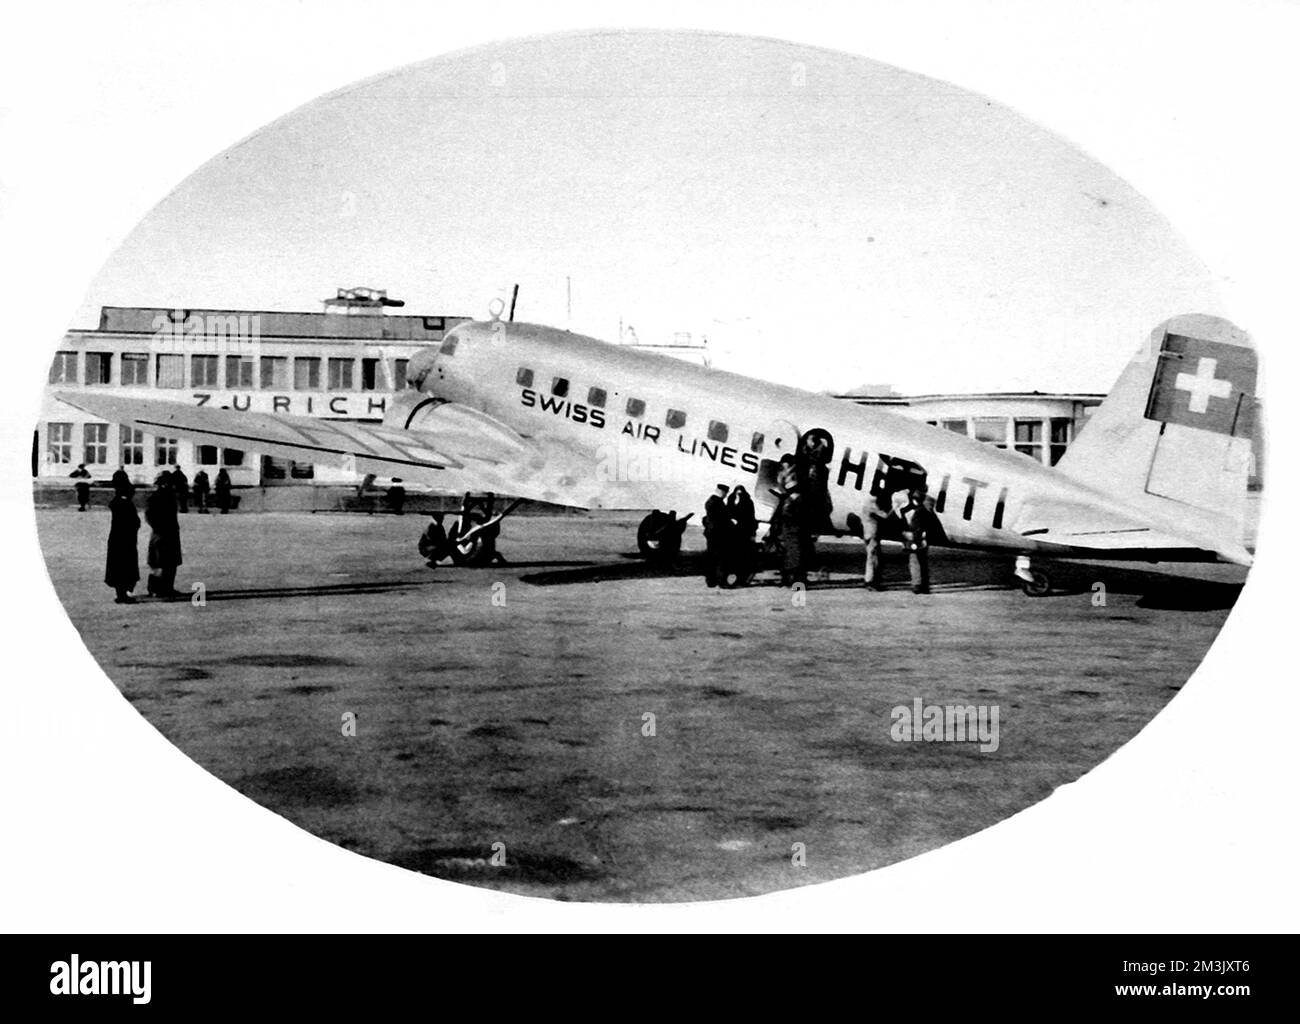 Photograph of a Swissair aeroplane, of a type used between London and Zurich in 1936, seen at Zurich Airport.      Winter flights between Croydon Airport and Zurich had just been introduced by Swissair and Imperial Airways, to provide a service for the growing numbers of holiday-makers going ski-ing.     Date: 1936 Stock Photo